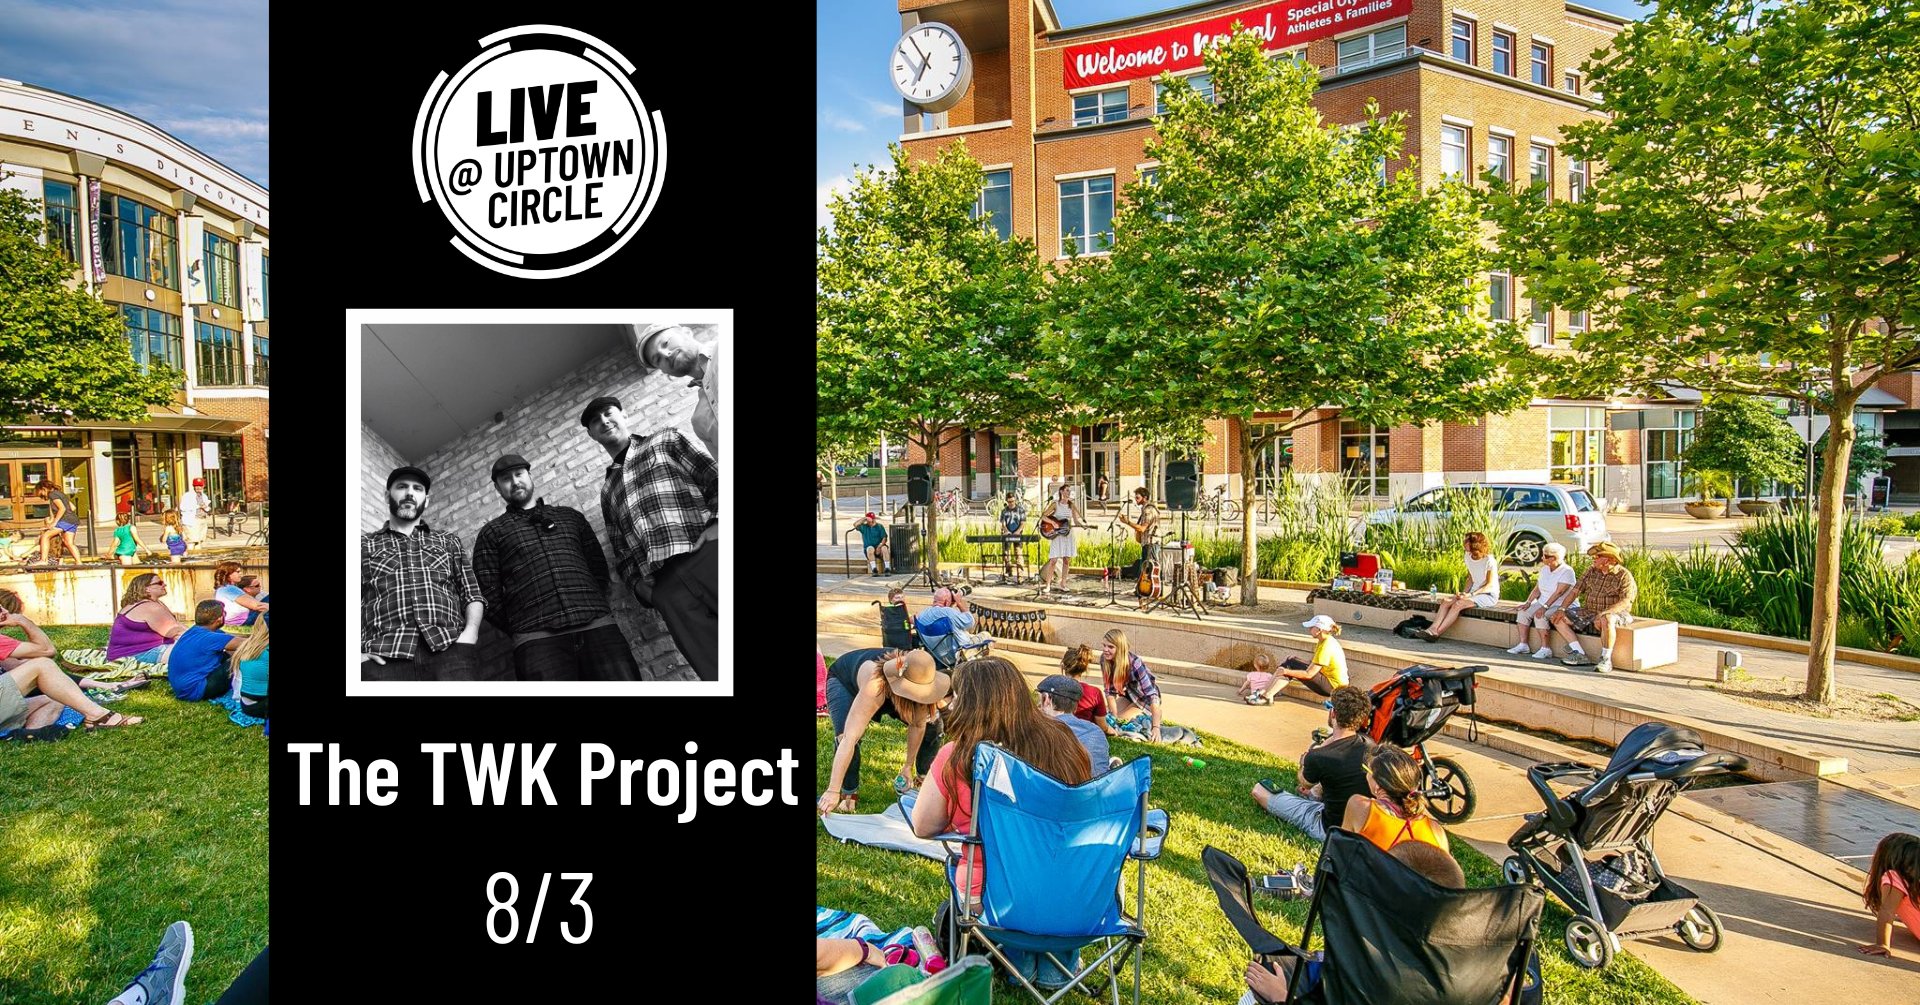 Normal LIVE presents The TWK Project @ Uptown Circle